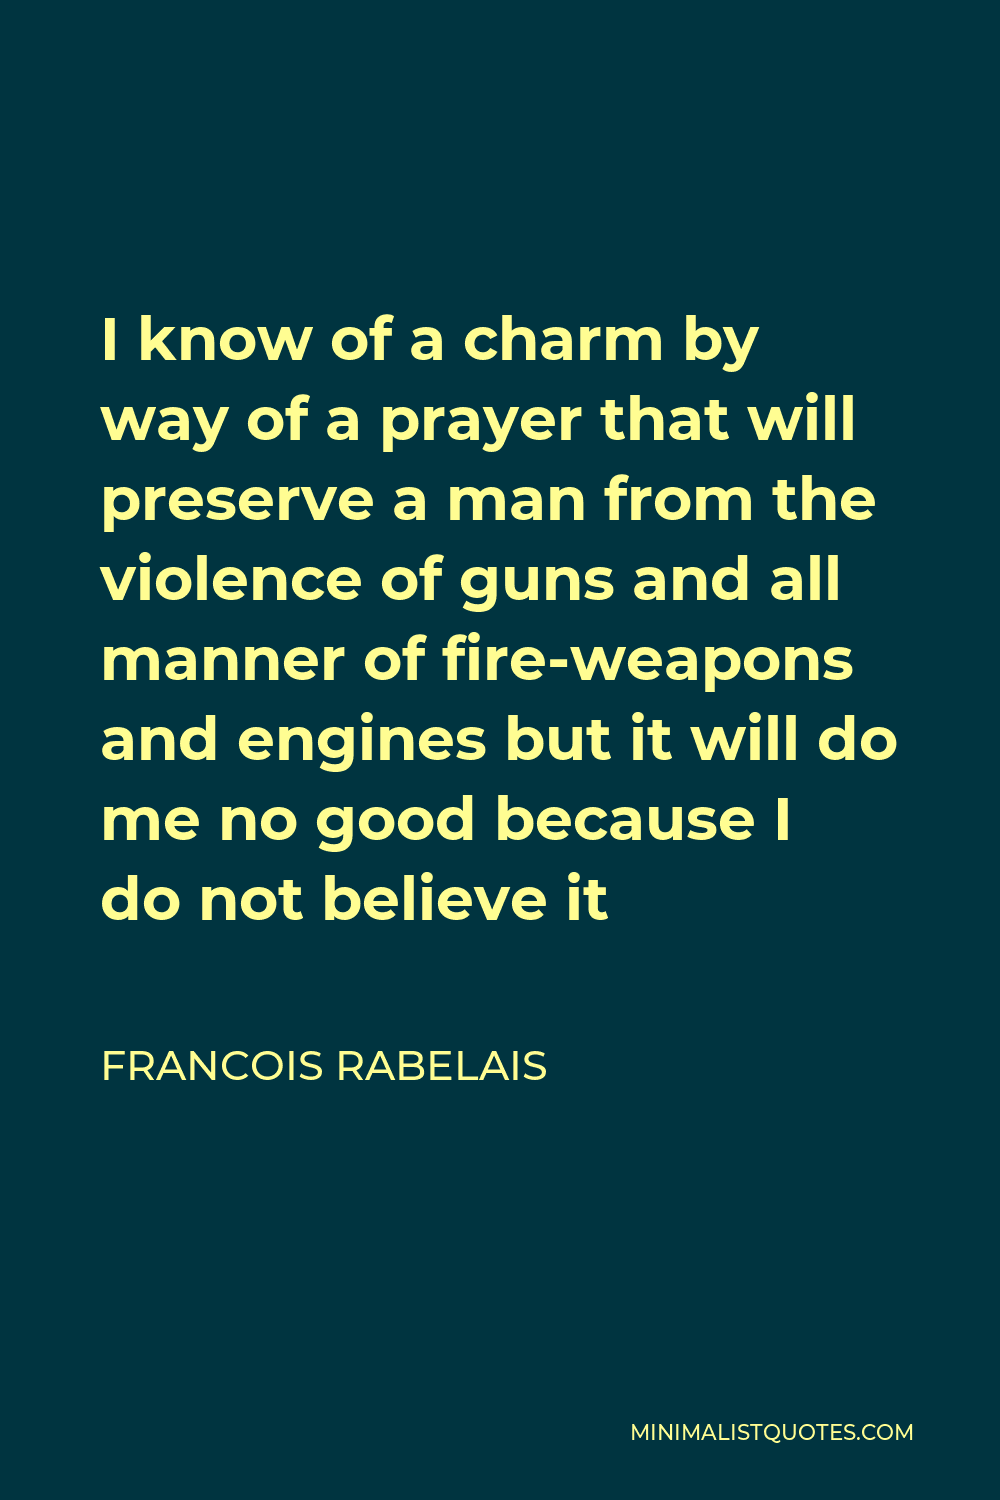 Francois Rabelais Quote - I know of a charm by way of a prayer that will preserve a man from the violence of guns and all manner of fire-weapons and engines but it will do me no good because I do not believe it